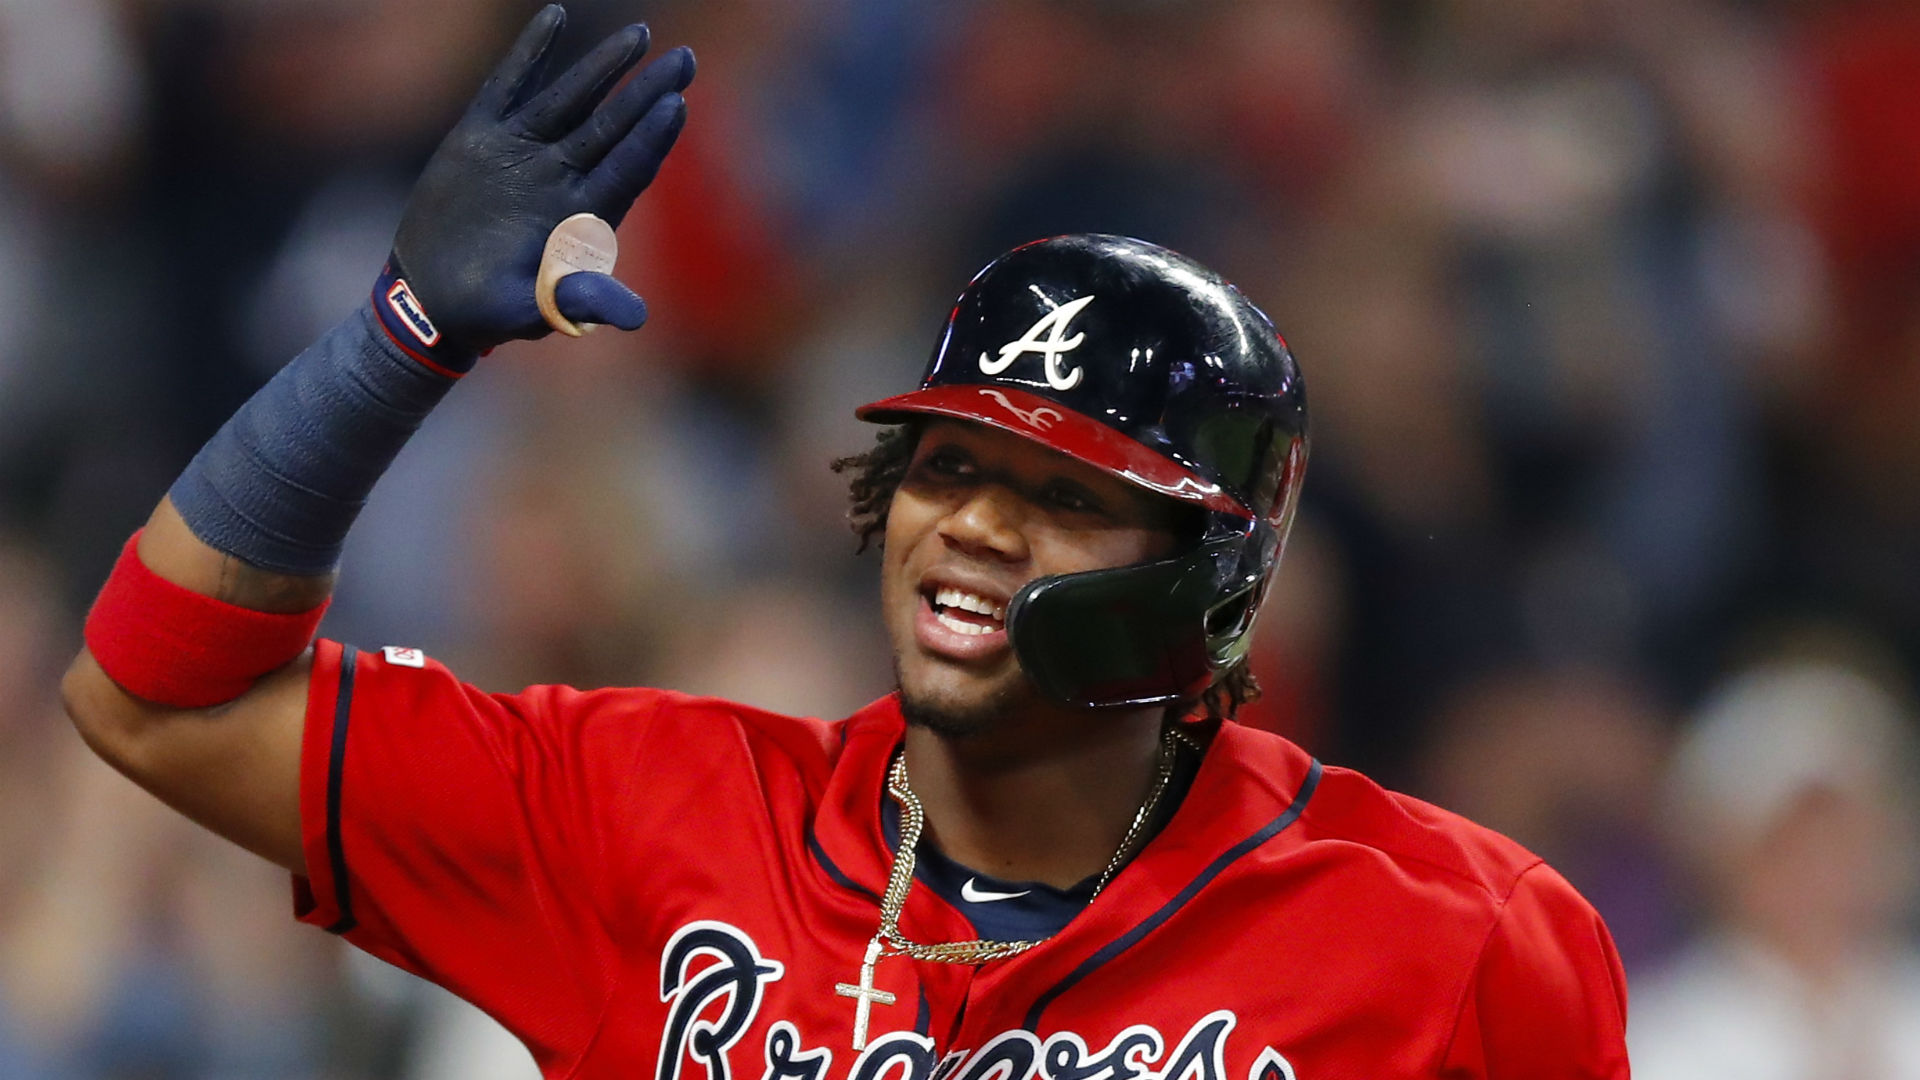 Ronald Acuña Jr. led Atlanta with a perfect night at the plate. He was 2 for 2 with two RBIs and three runs scored.